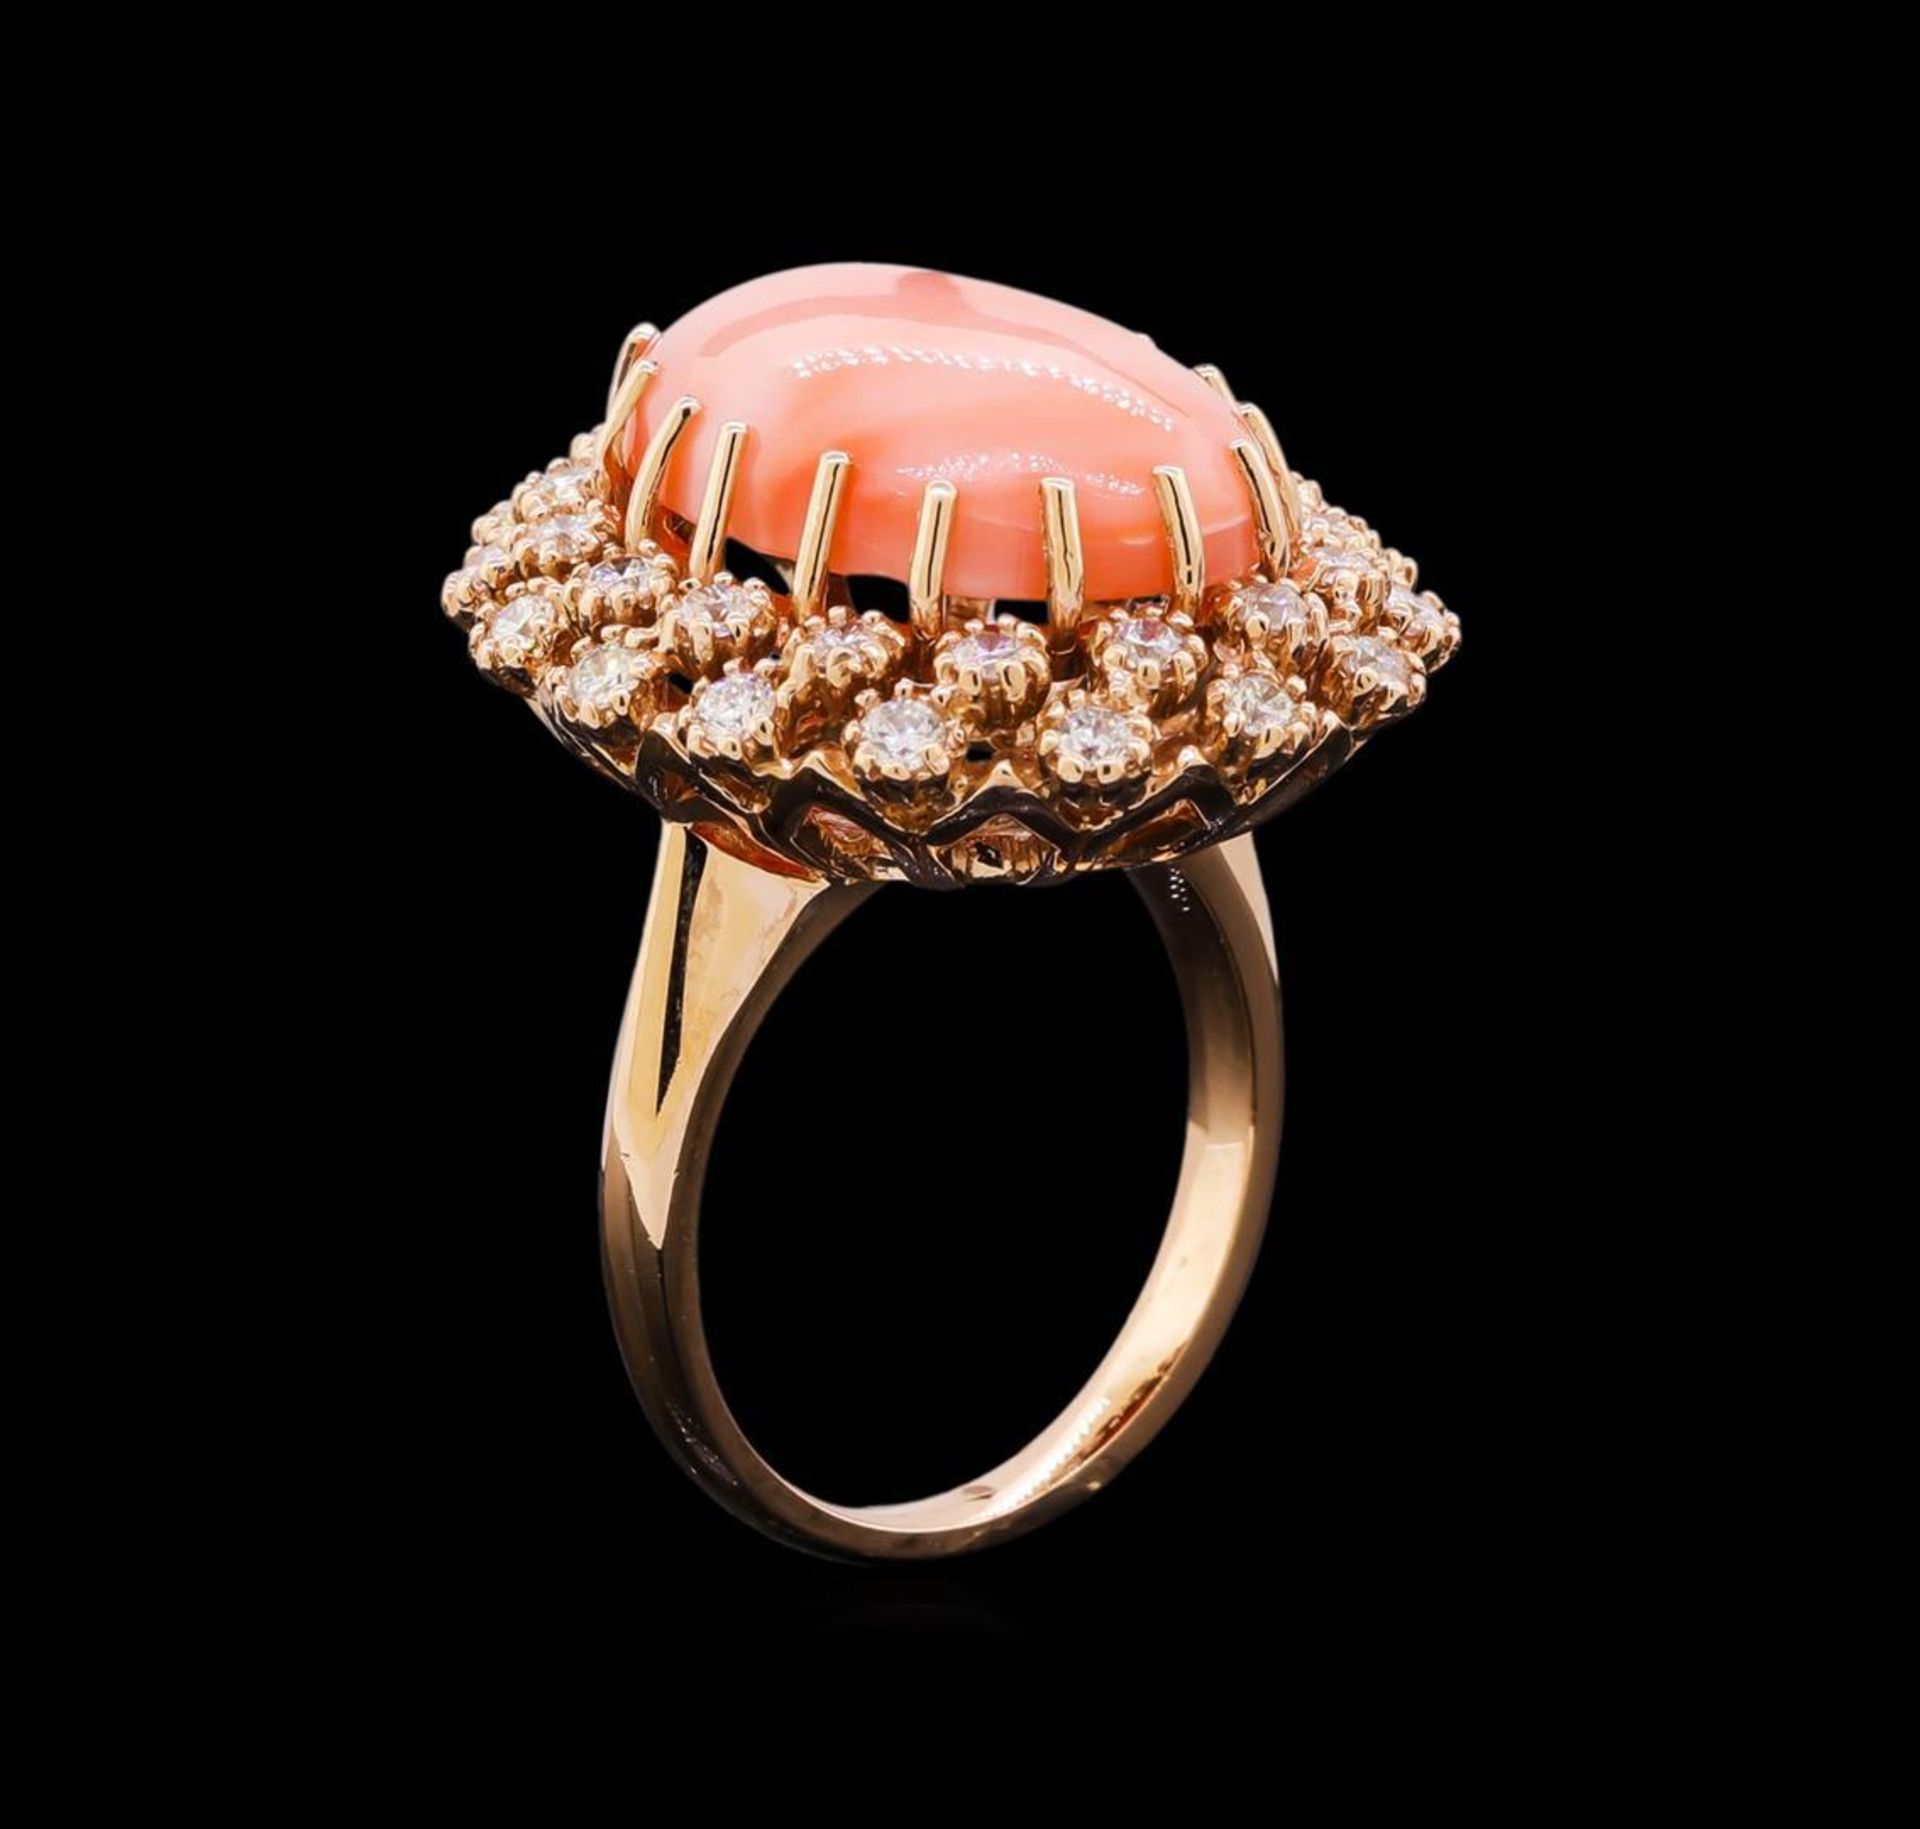 9.60 ctw Pink Coral and Diamond Ring - 14KT Rose Gold - Image 4 of 5